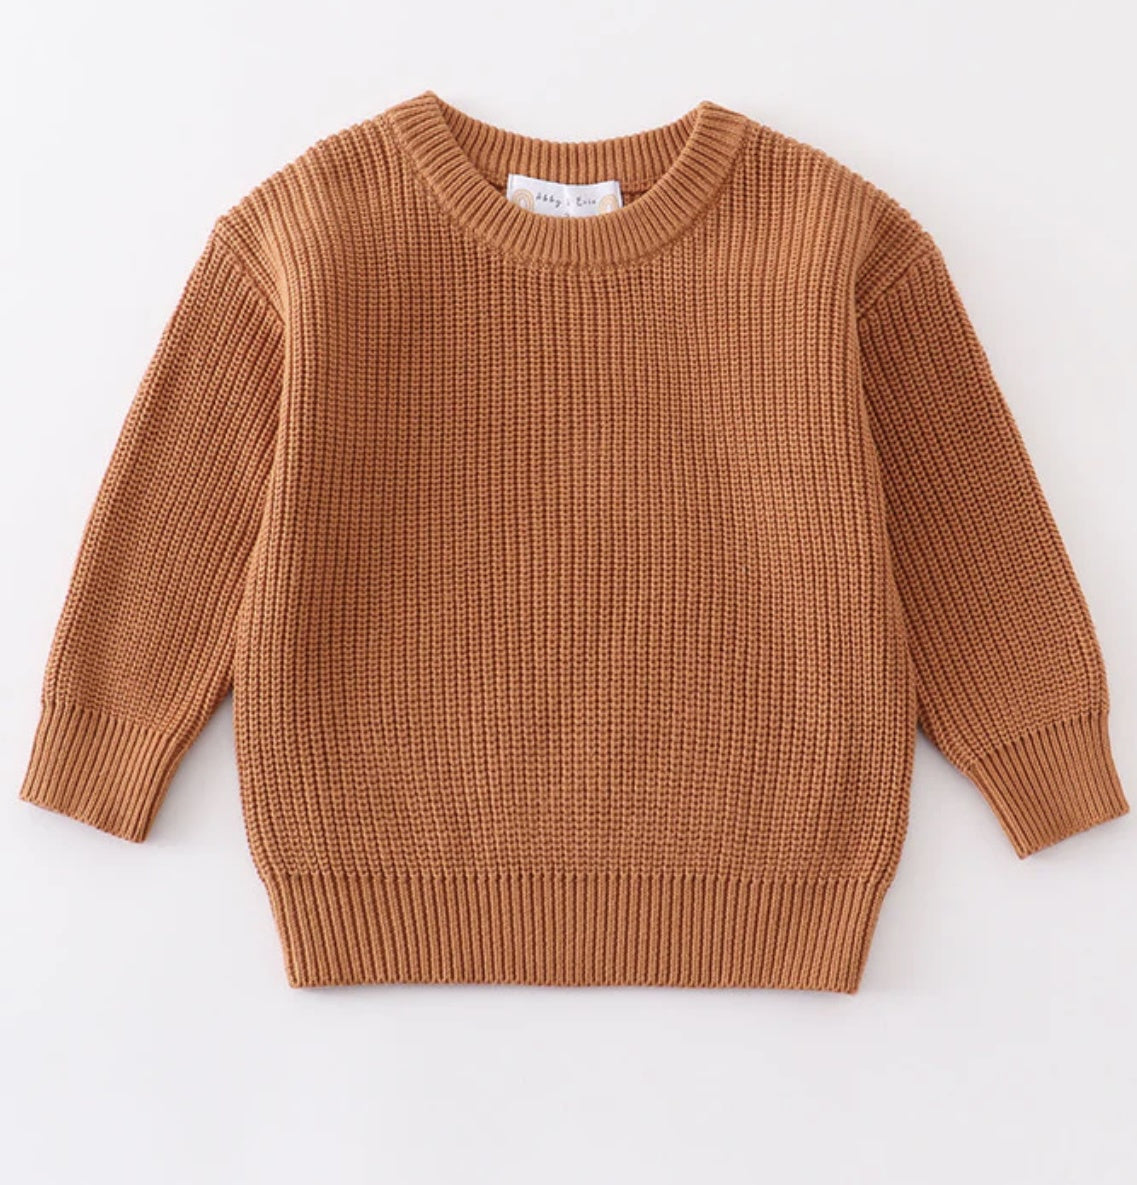 Knit Pullover Sweater in Camel